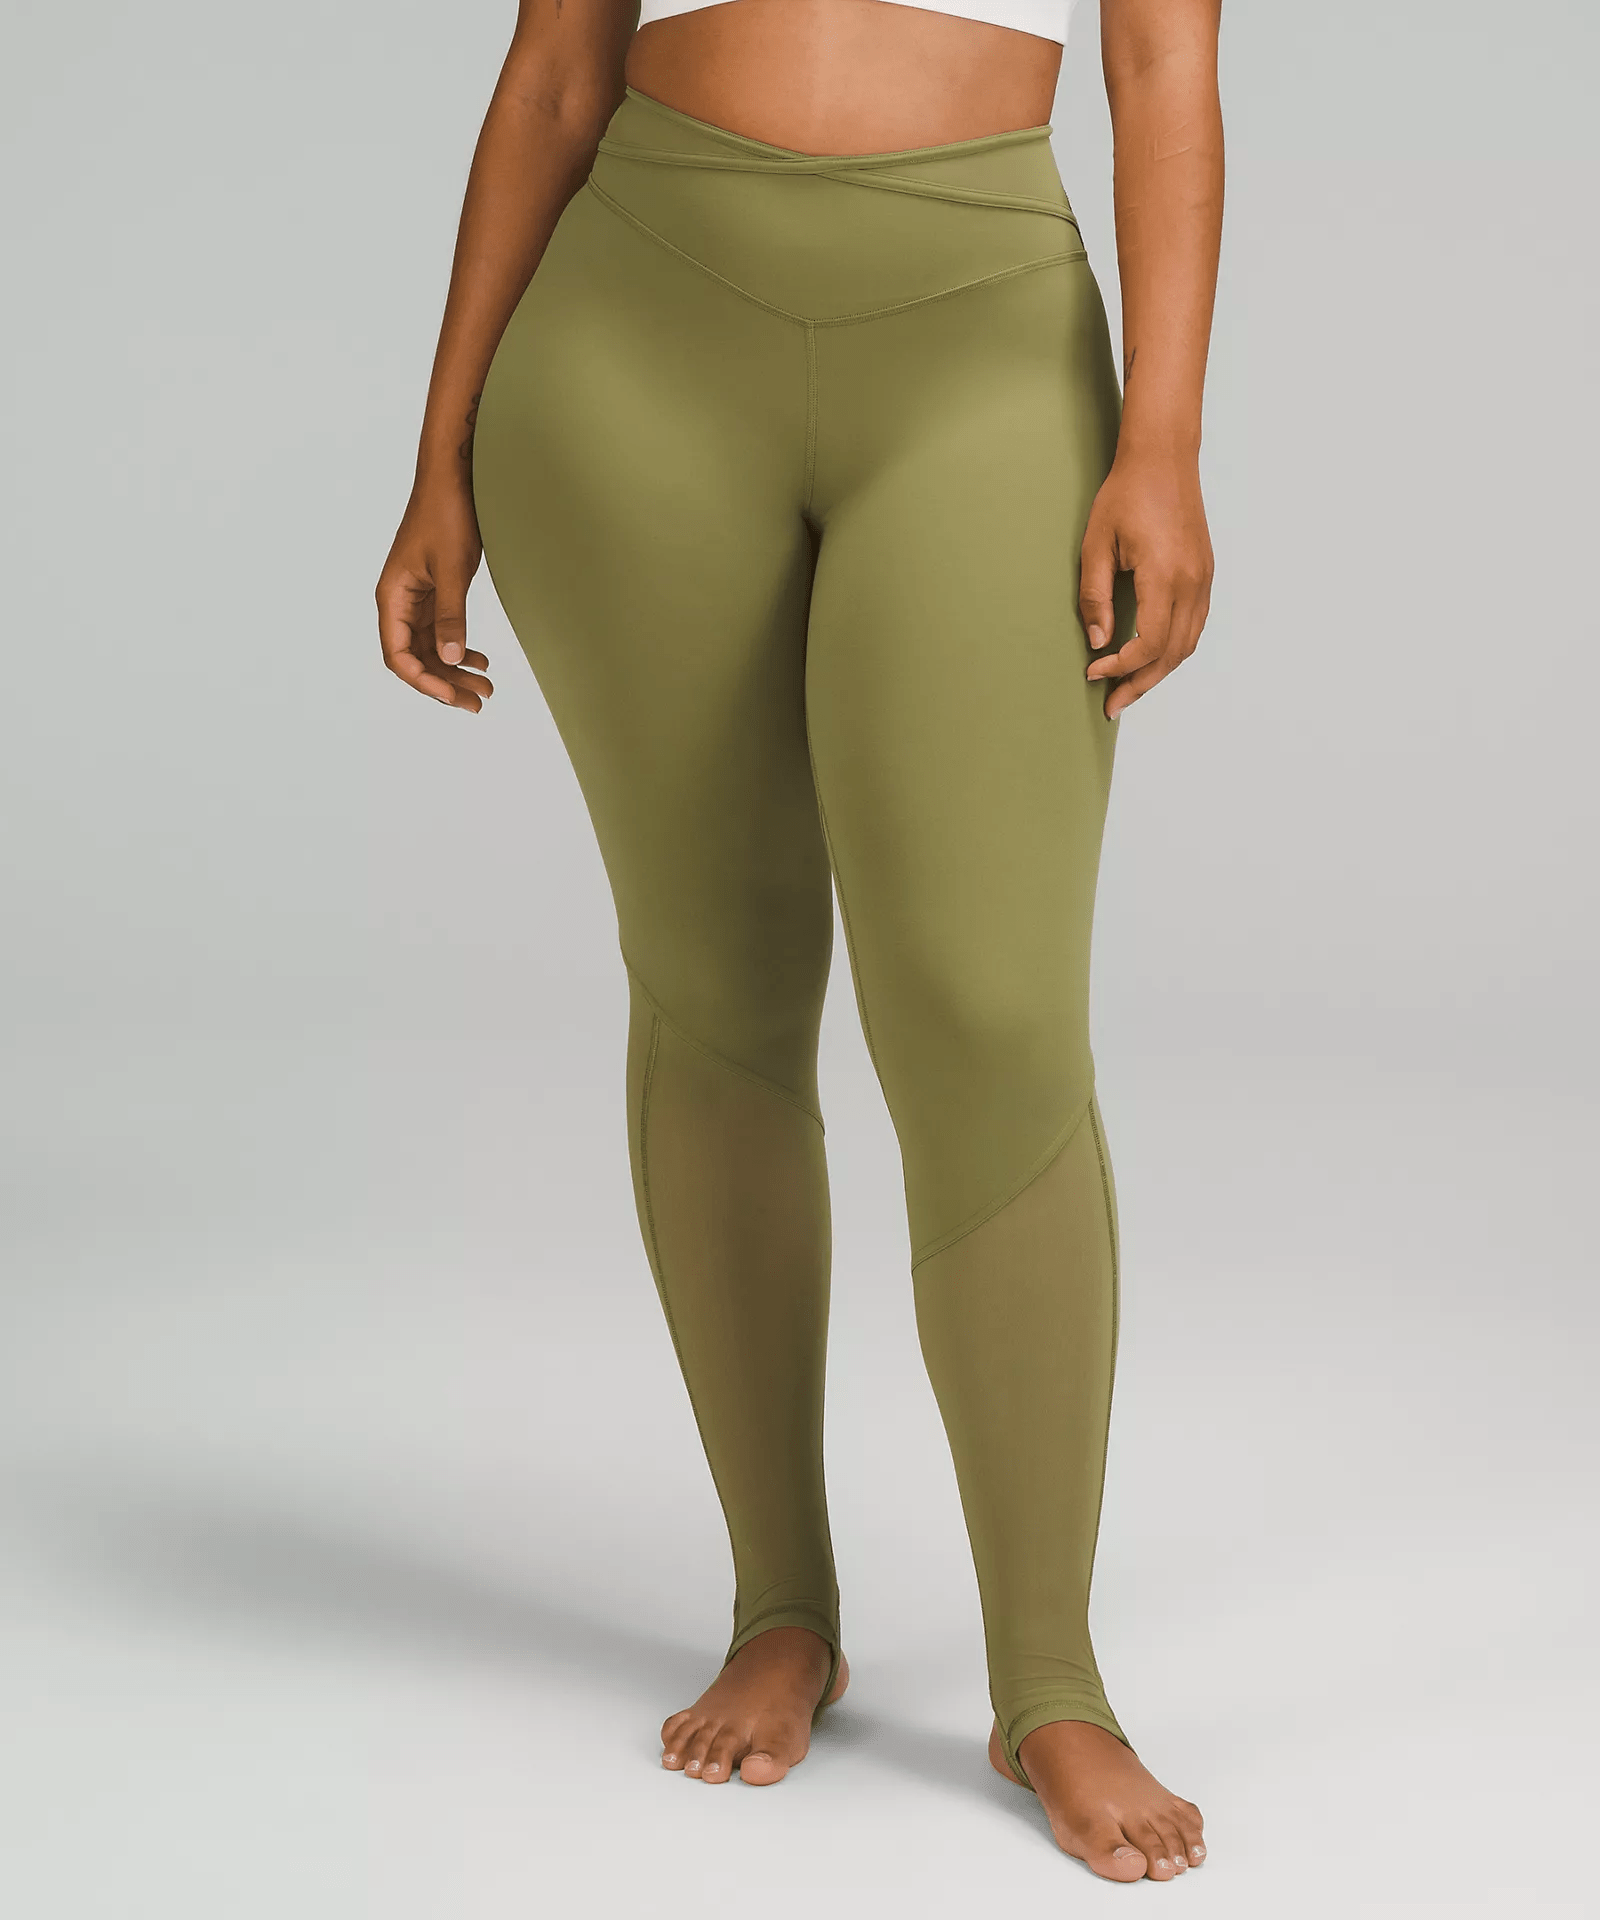 Hue Fleece Lined Leggings Reviews | International Society of Precision  Agriculture